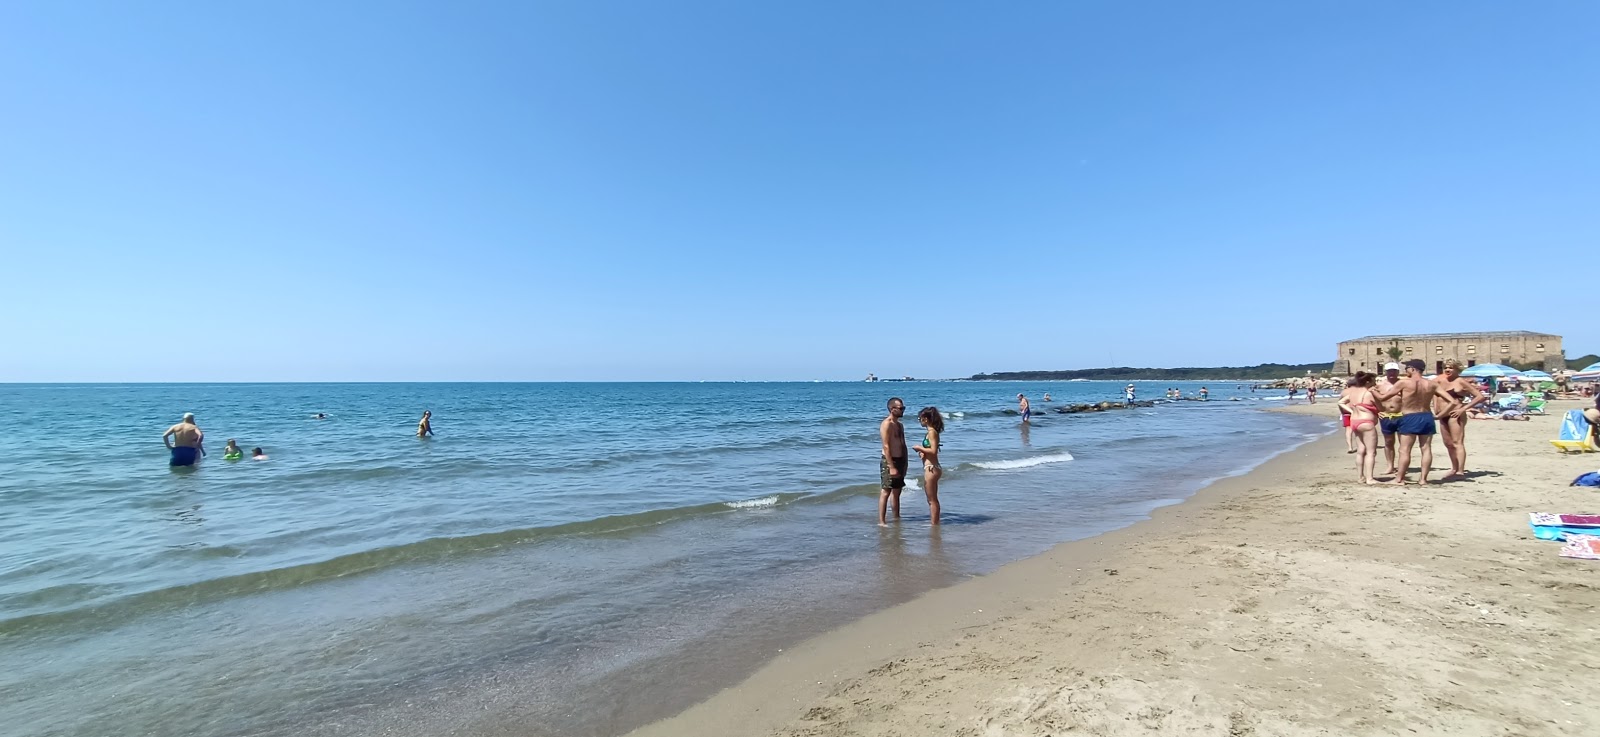 Photo of Spiaggia di Valmontorio with blue water surface